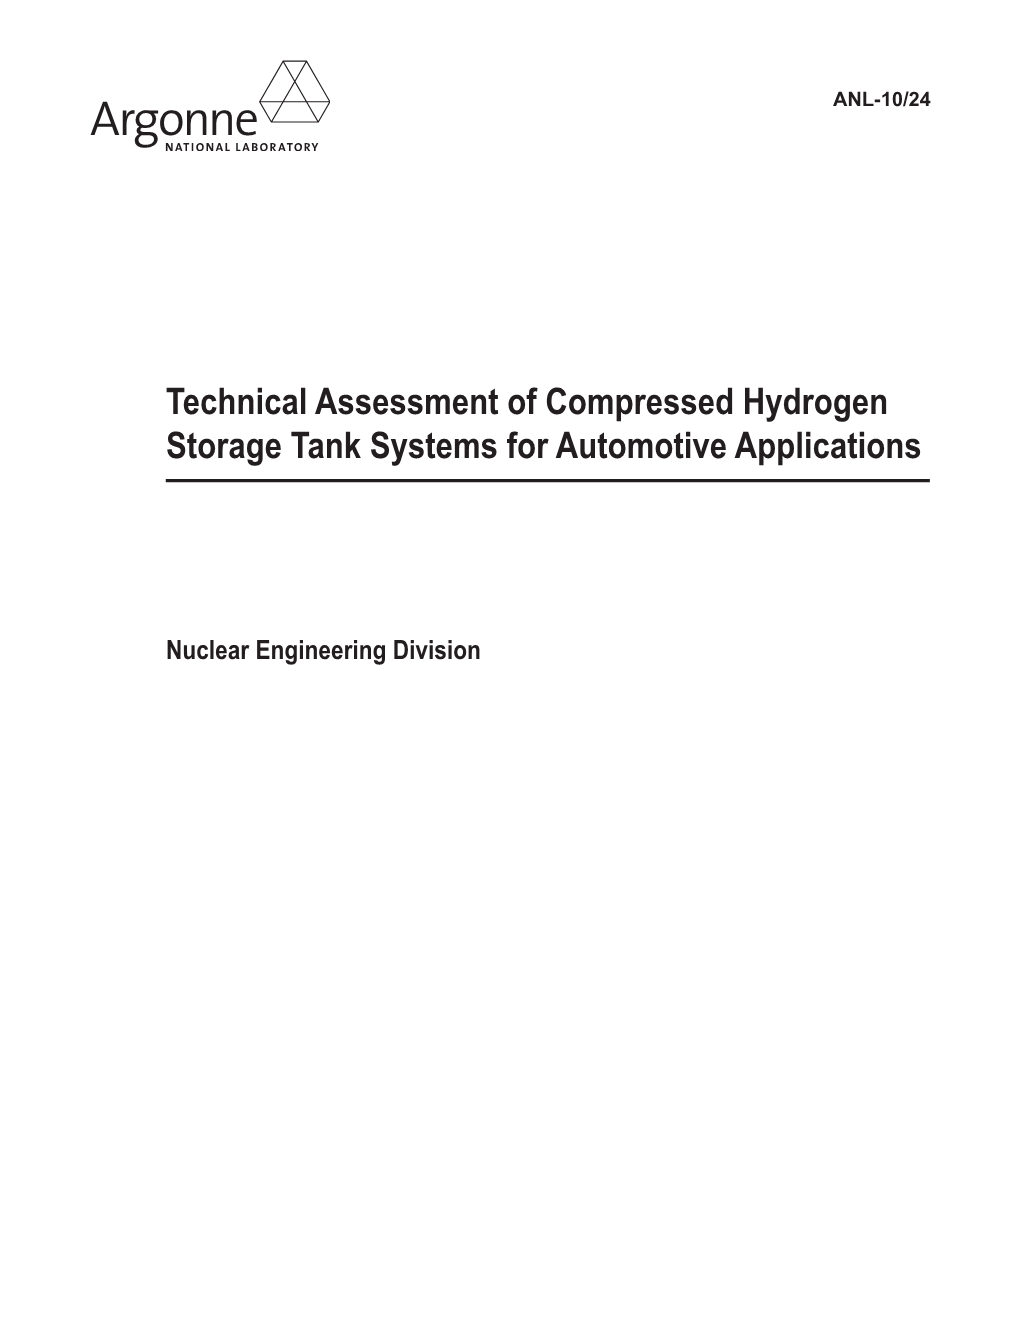 Technical Assessment of Compressed Hydrogen Storage Tank Systems for Automotive Applications